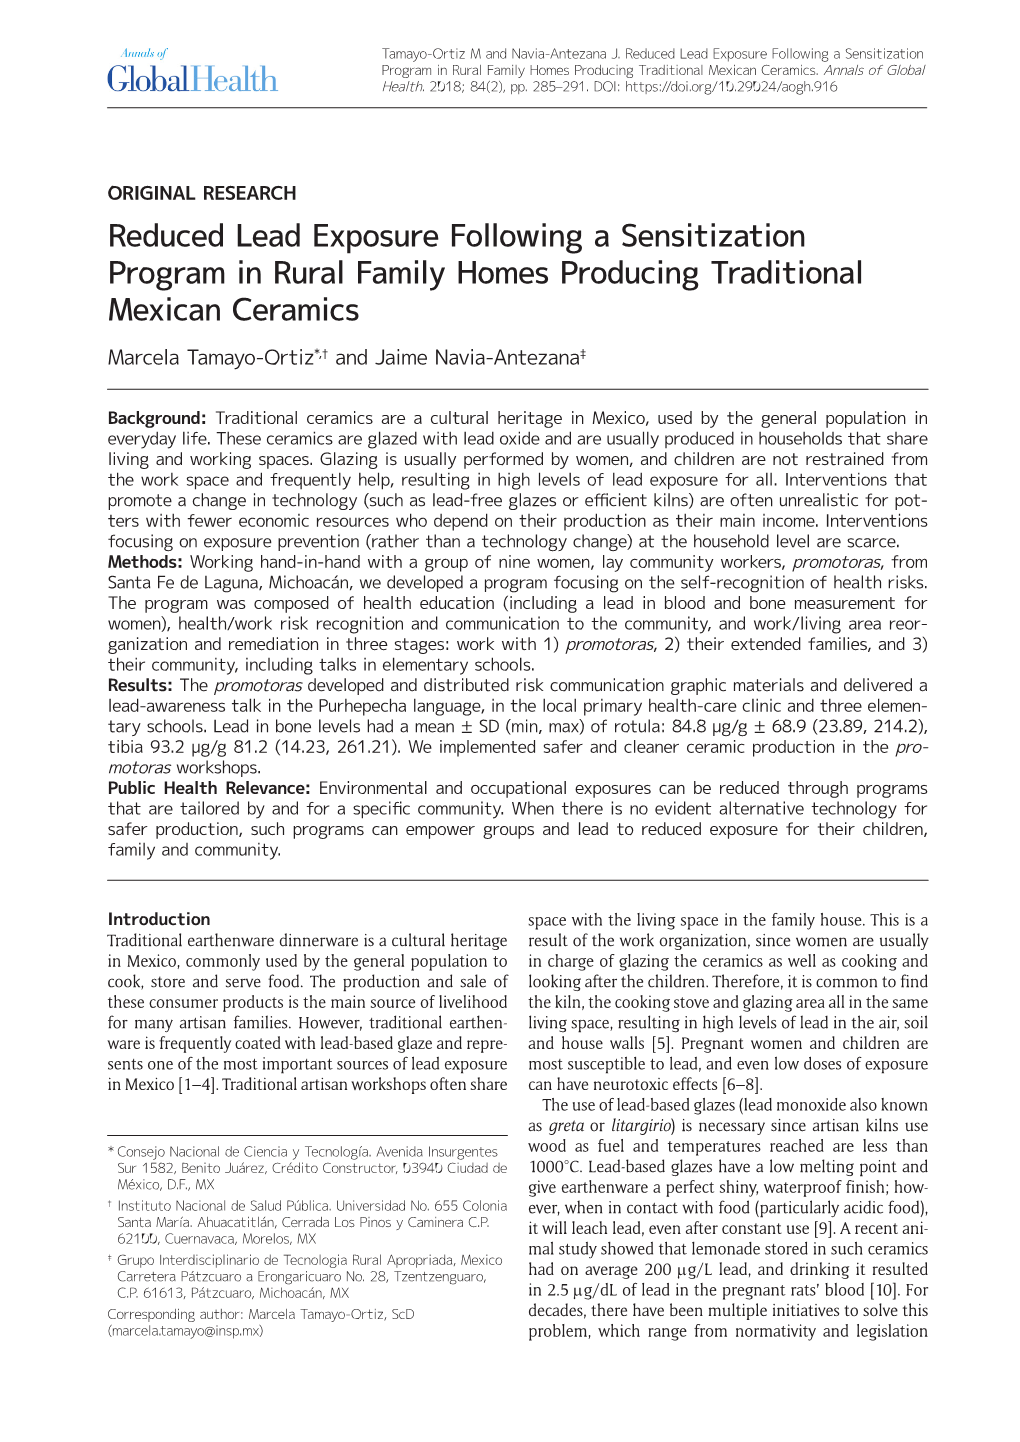 Reduced Lead Exposure Following a Sensitization Program in Rural Family Homes Producing Traditional Mexican Ceramics